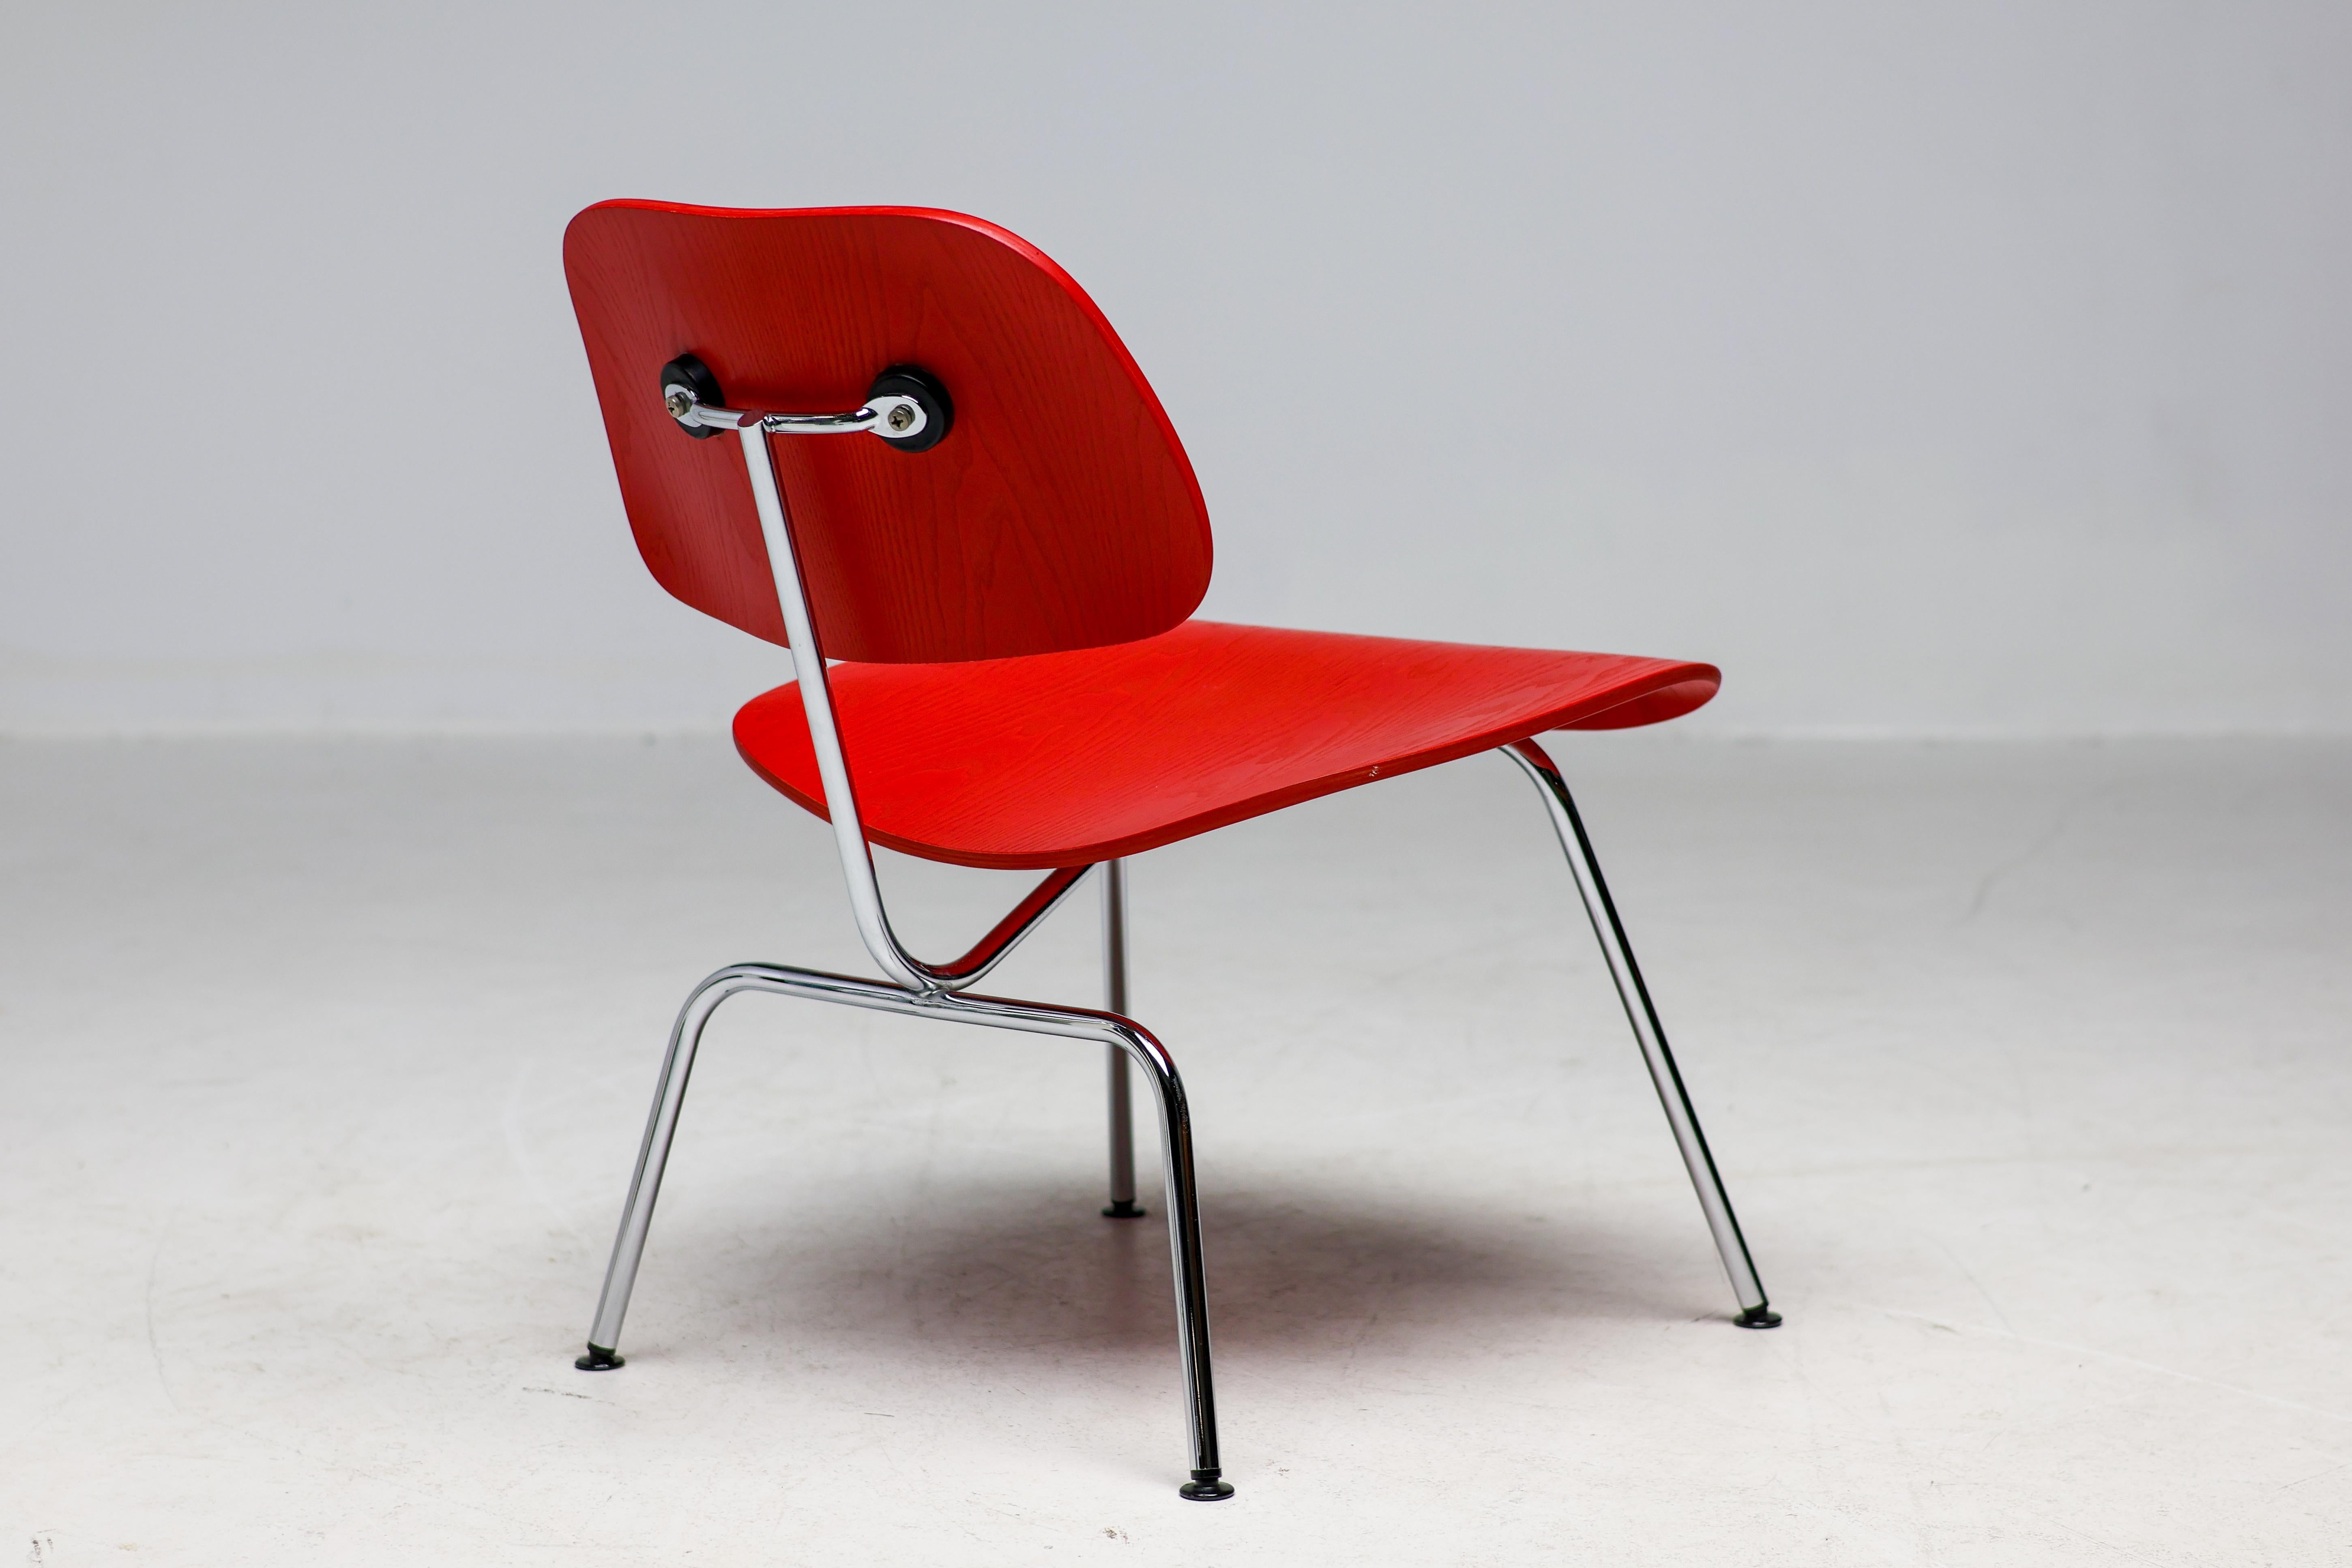 Mid-Century Modern Bright Red LCM chair by Charles and Ray Eames for Vitra